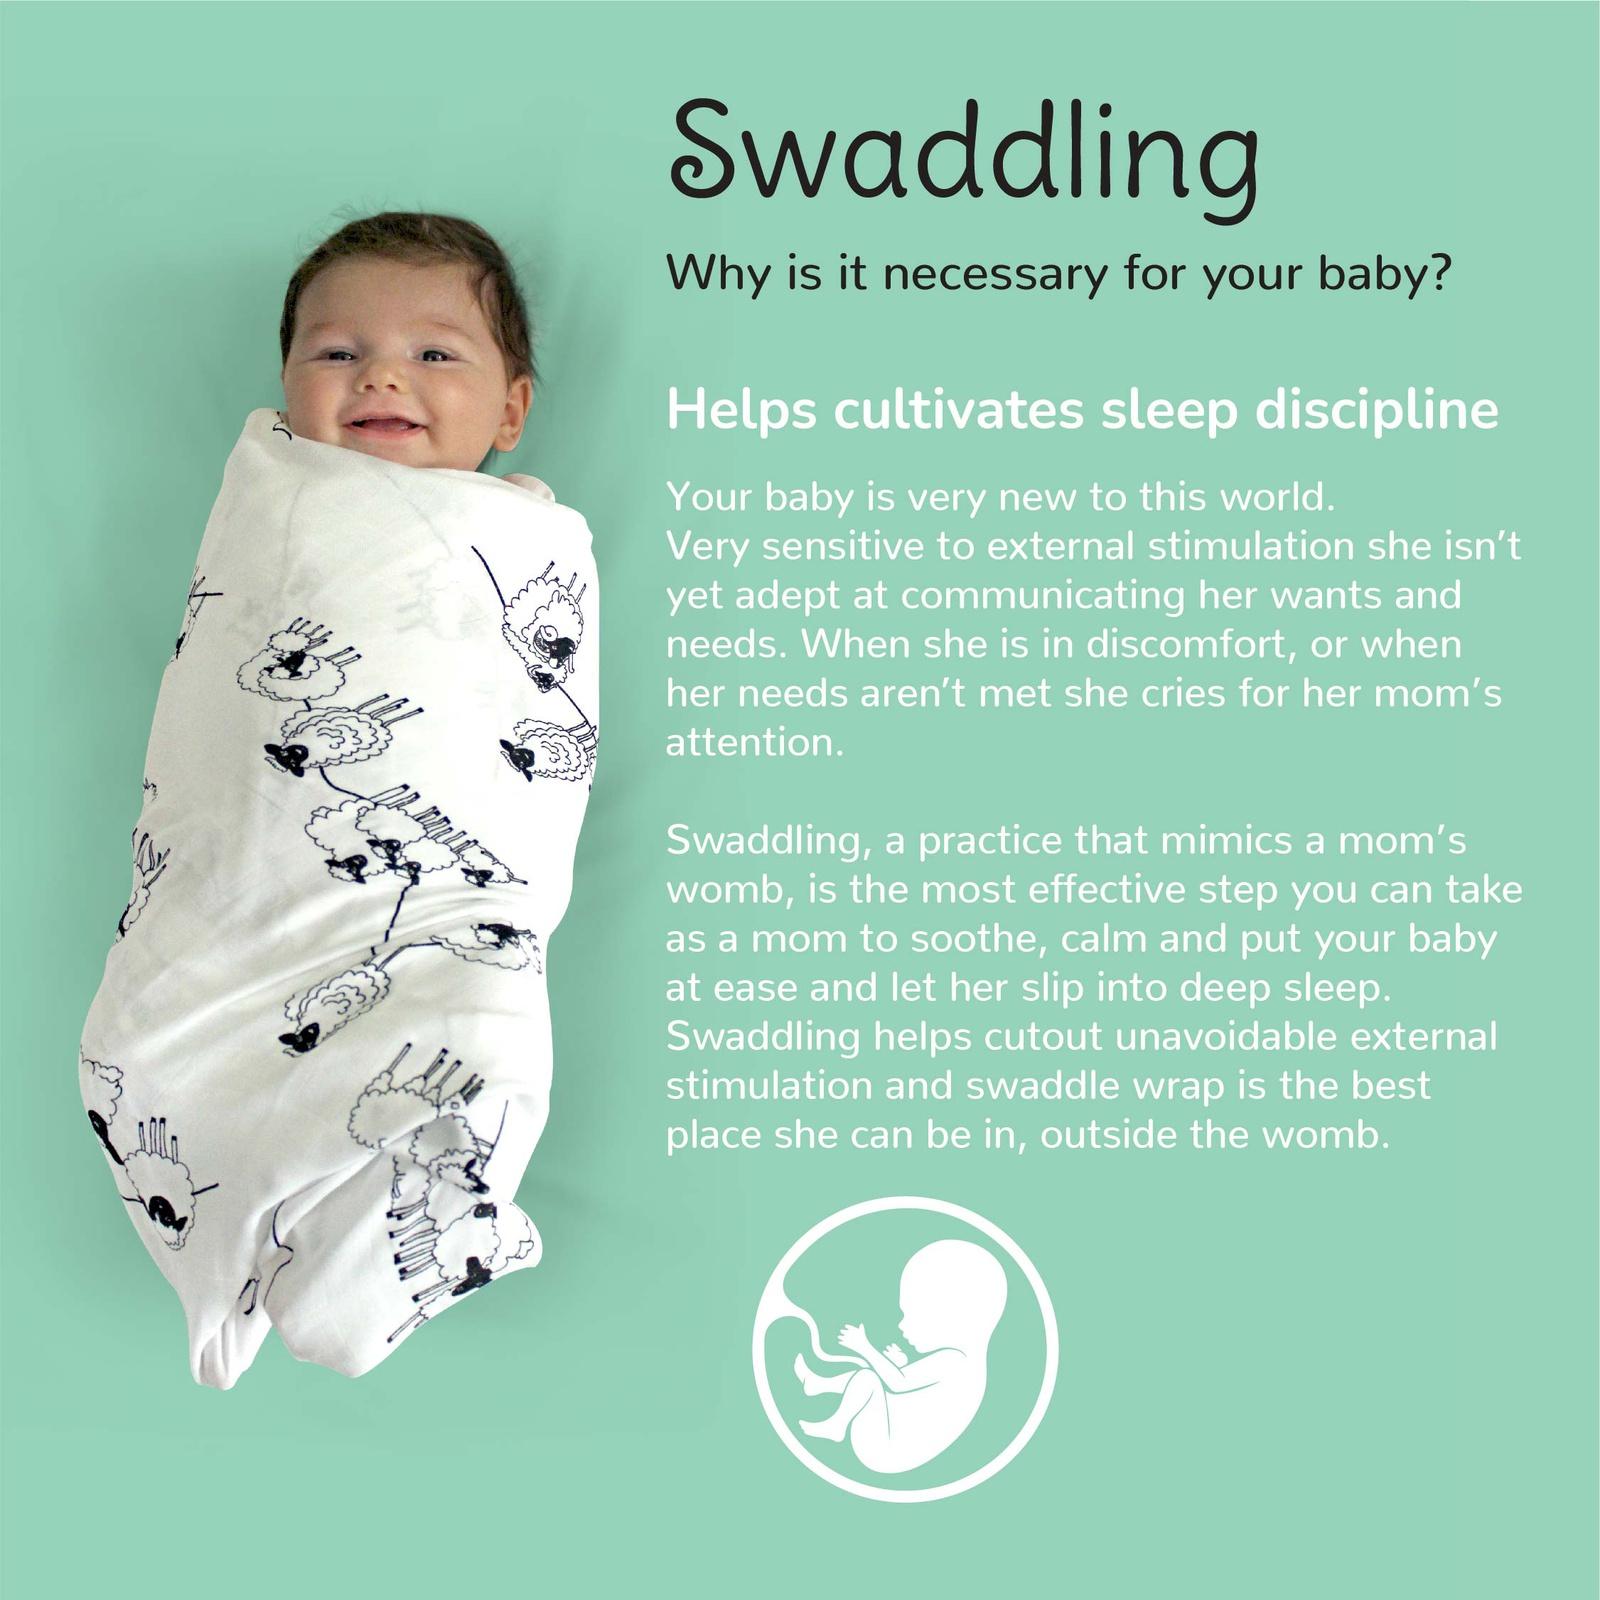 Swaddling benefits for the baby